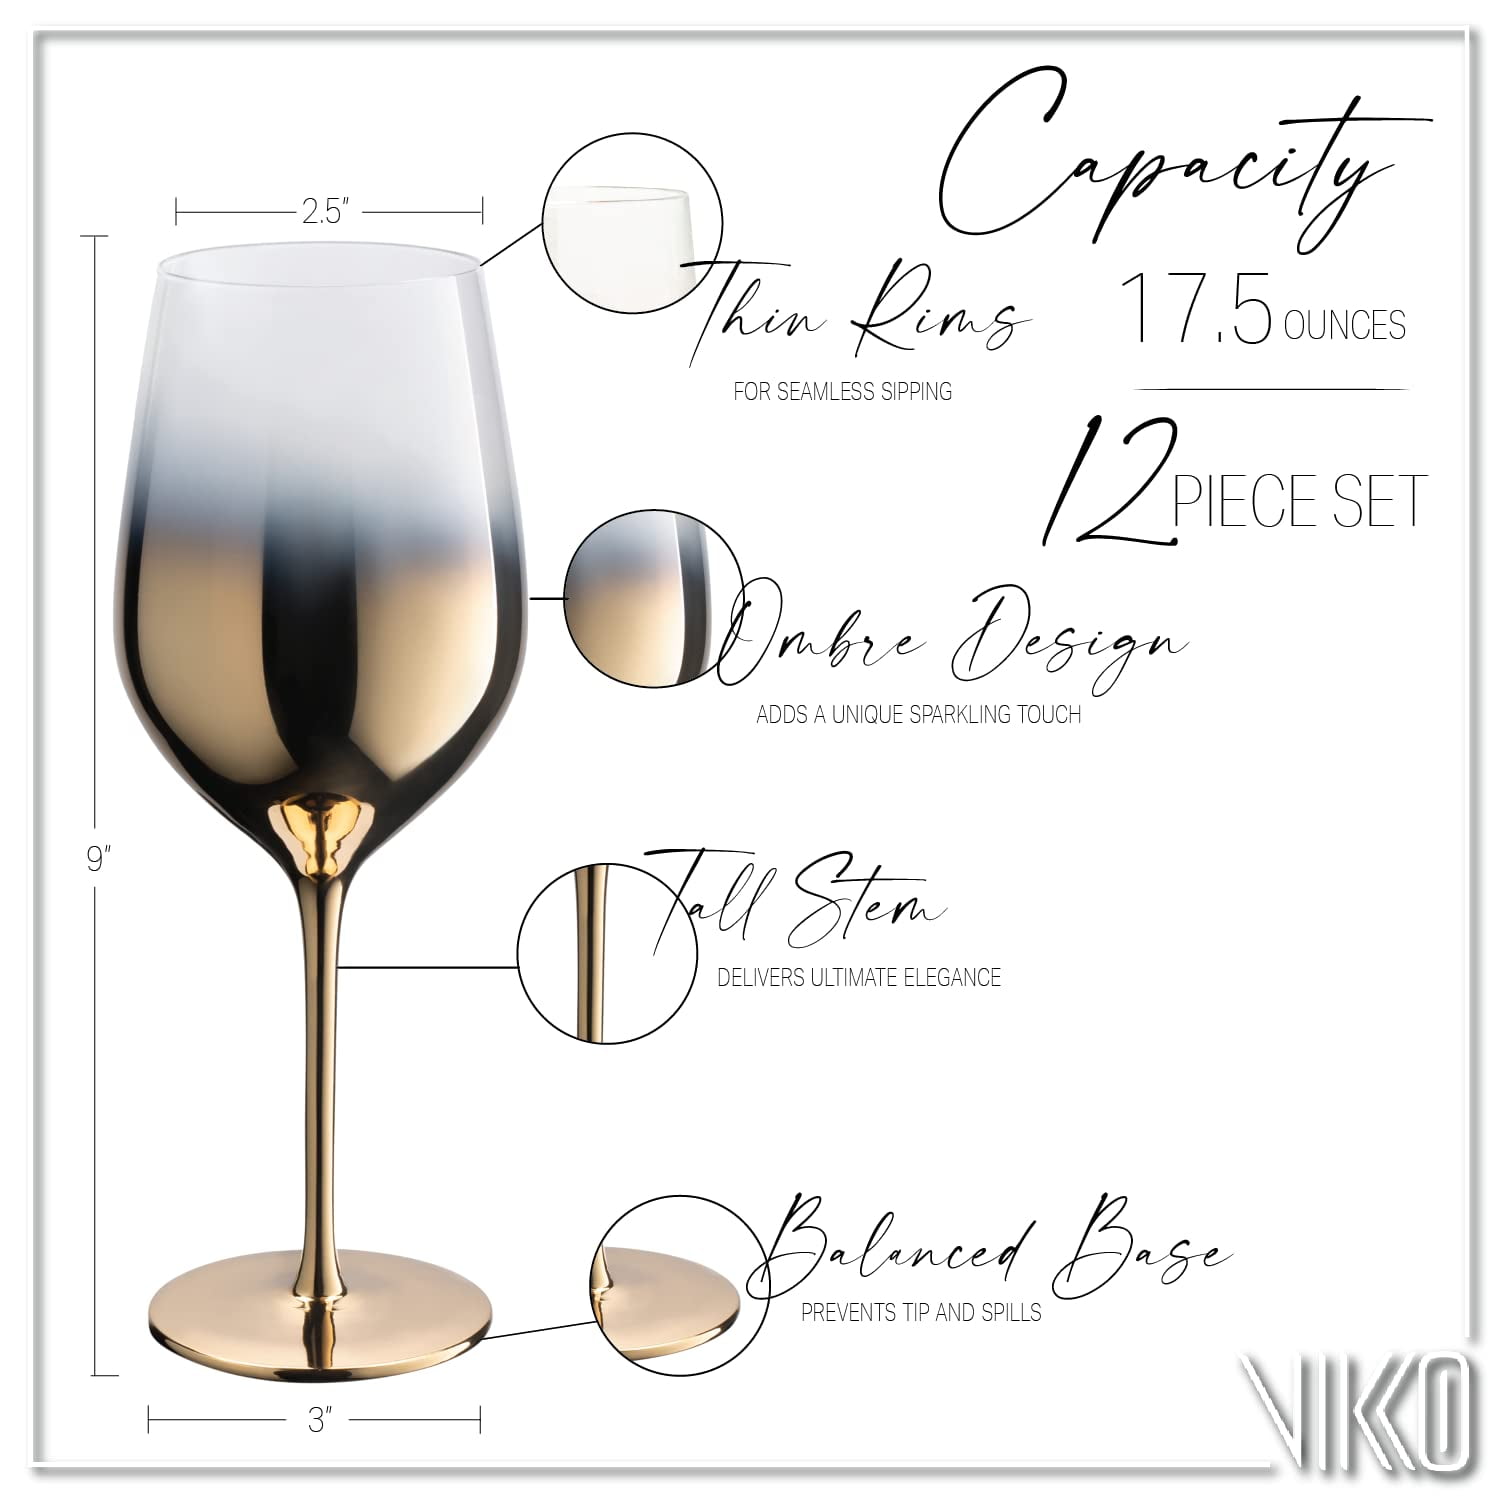 Vikko dcor Silver Ombre White Wine Glasses | Thin, Handblown Glass Tall, Elegant Stem Dishwasher Safe 17.5 Ounce Cup Great Gift Idea Set of 8 Wine